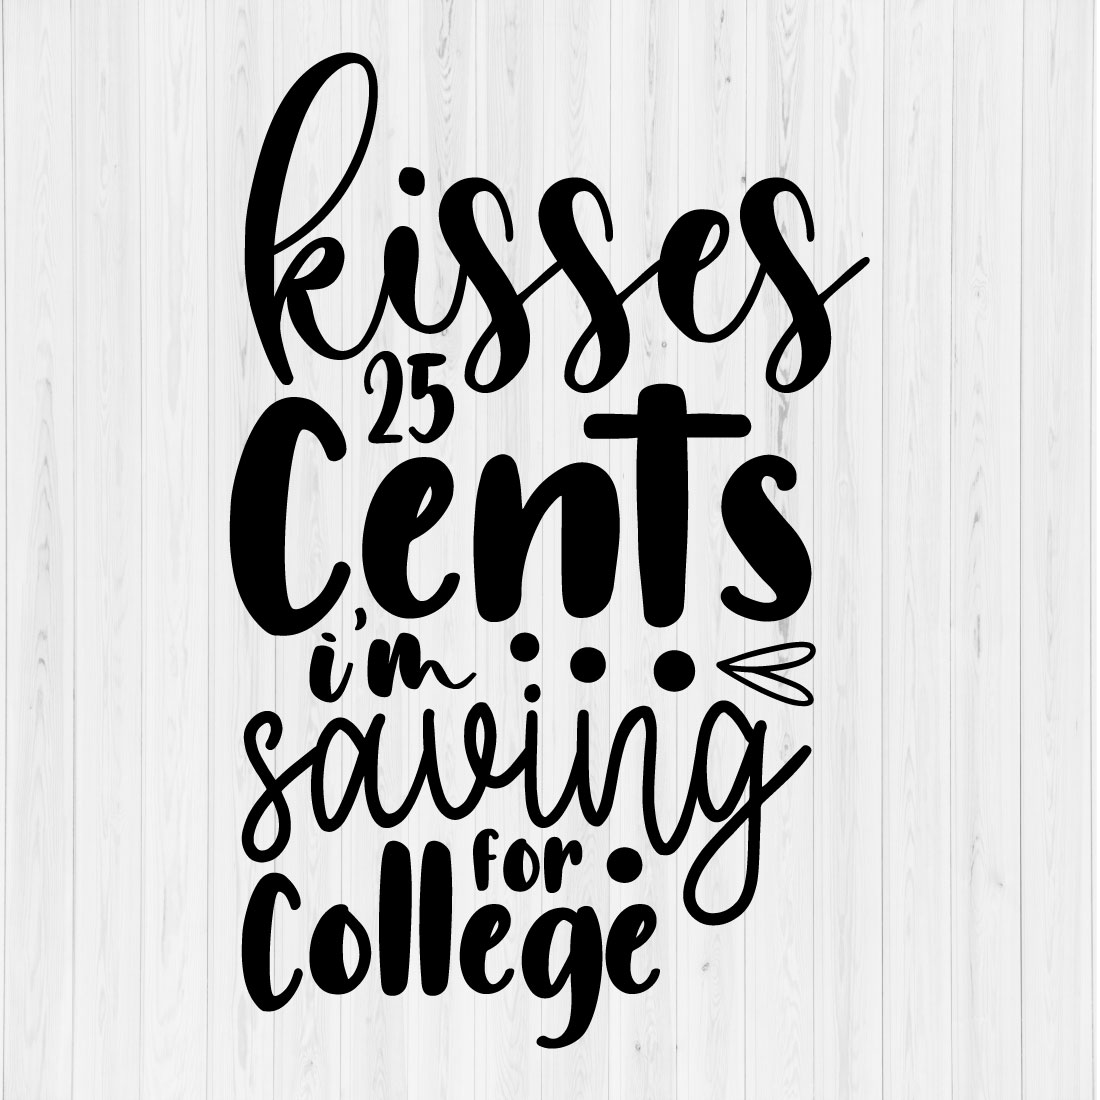 kisses 25 cents i'm saving for college cover image.